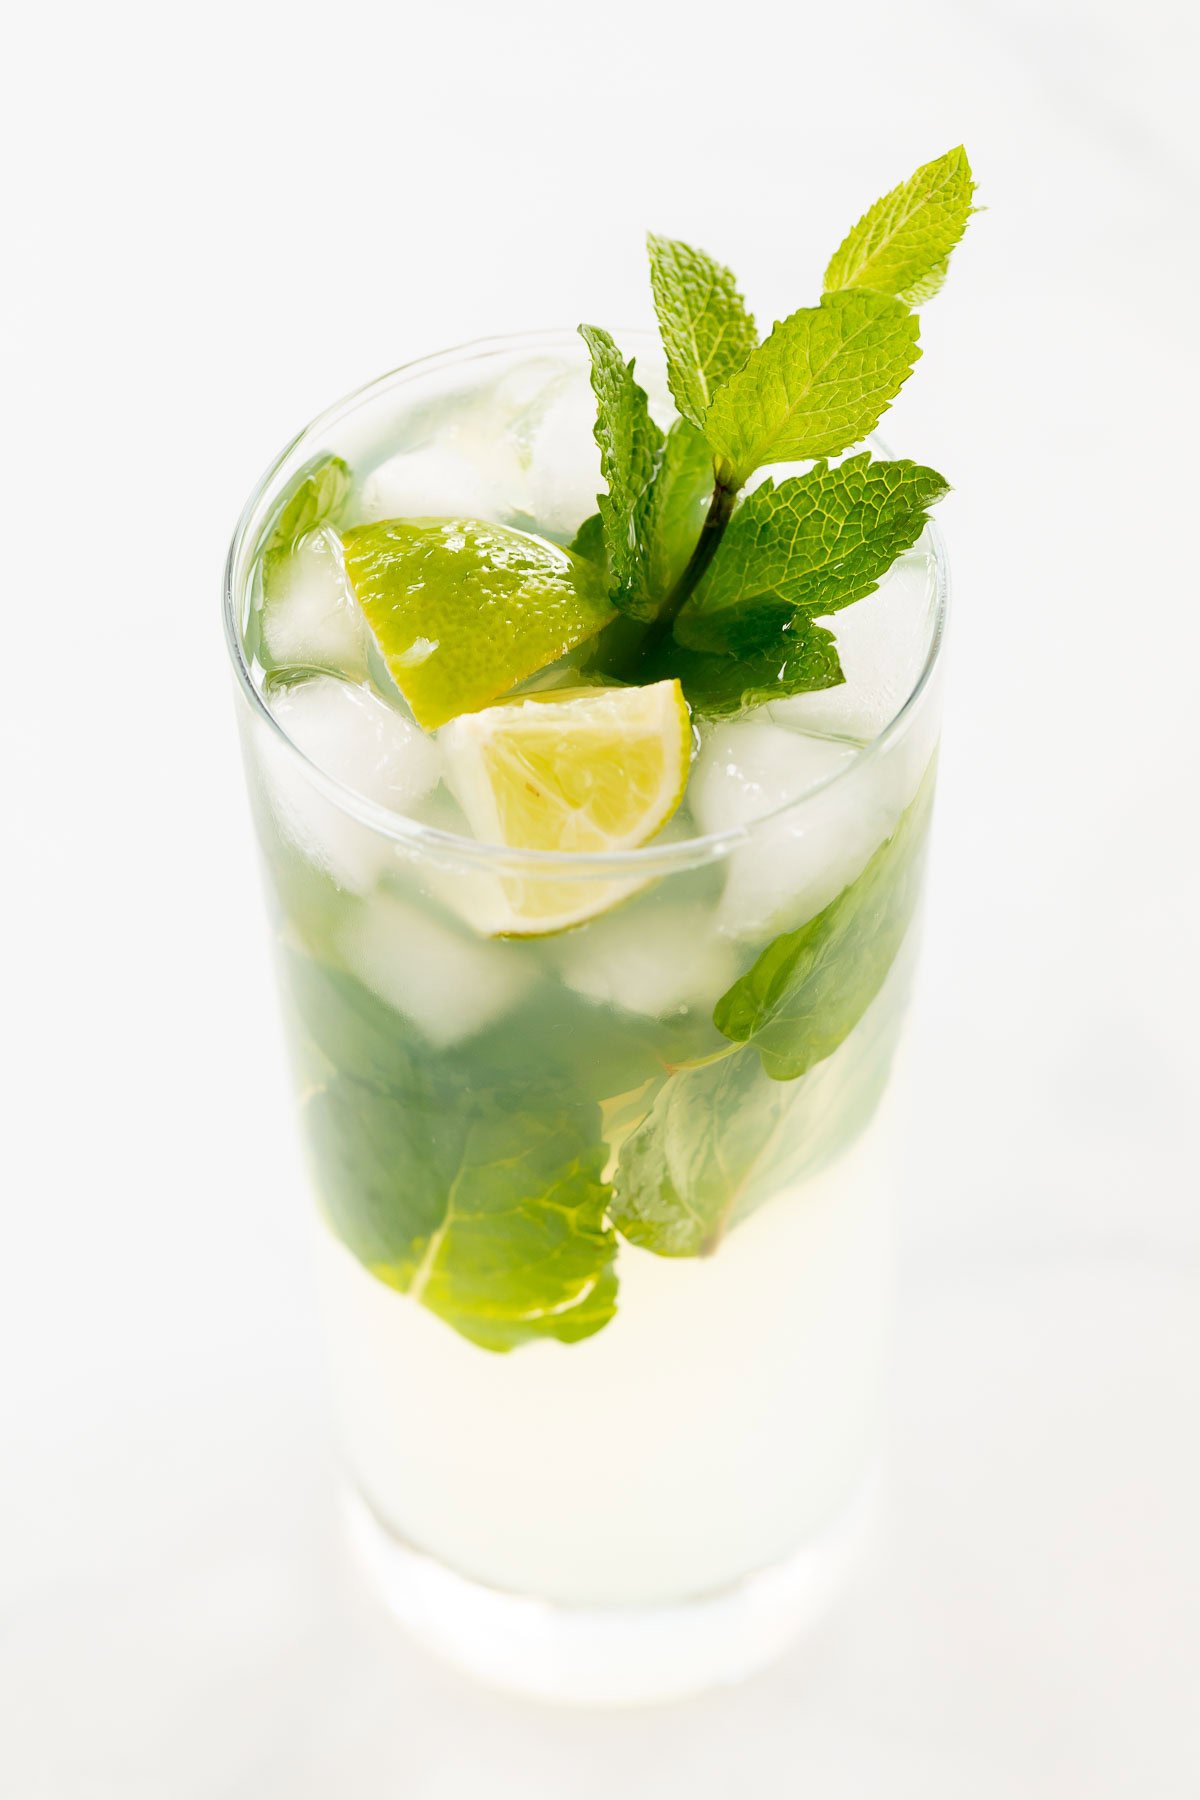 A refreshing tequila mojito cocktail with lime, mint leaves, and ice cubes in a tall glass against a white background.